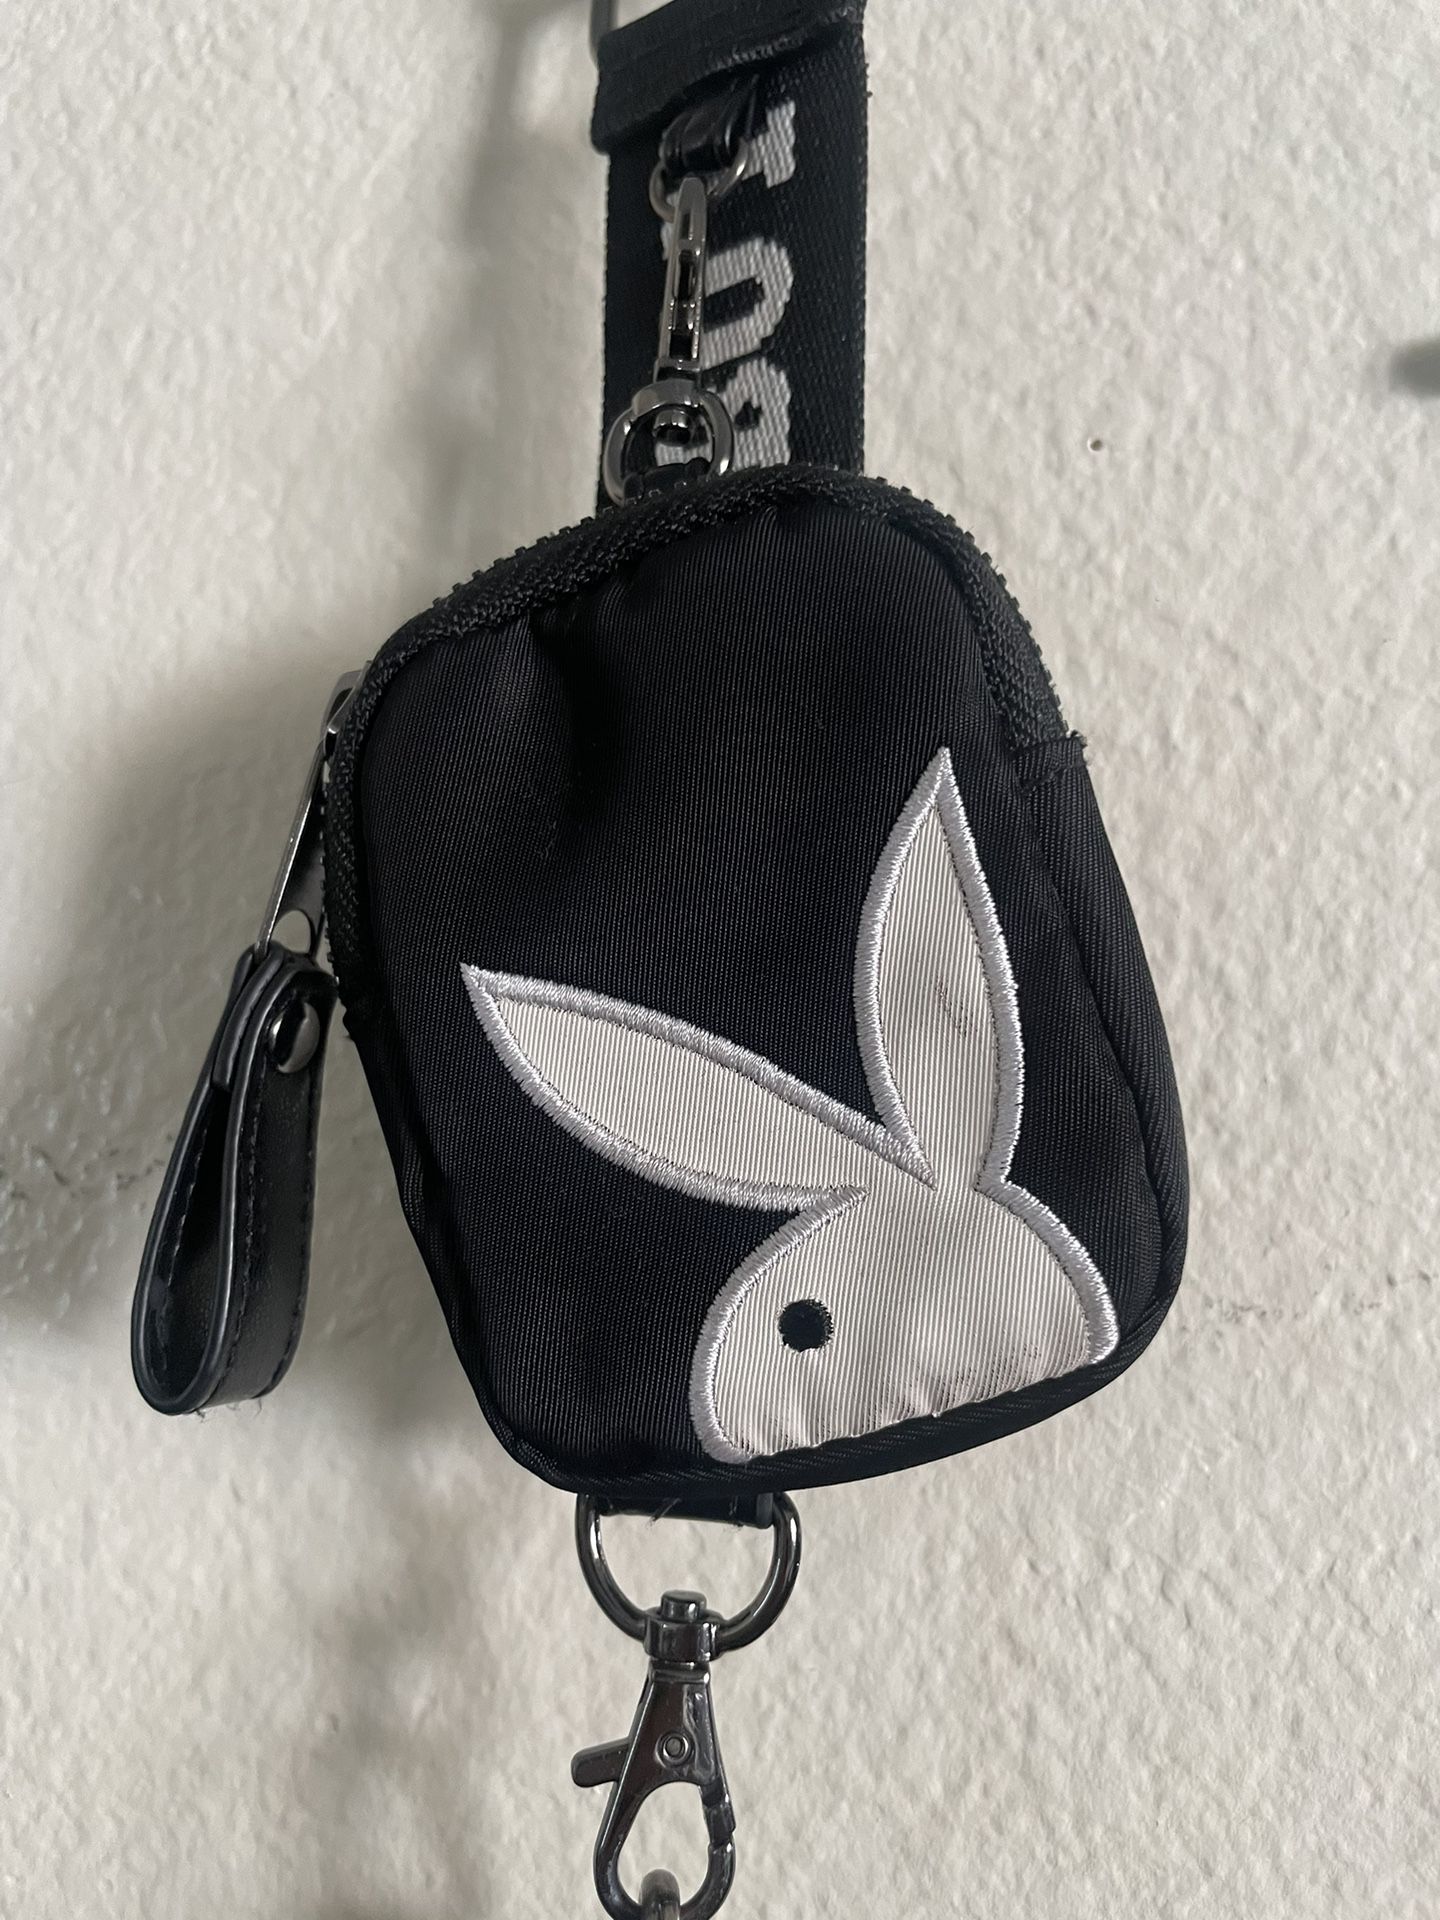 Small Playboy Purse for Sale in Jacksonville, FL - OfferUp